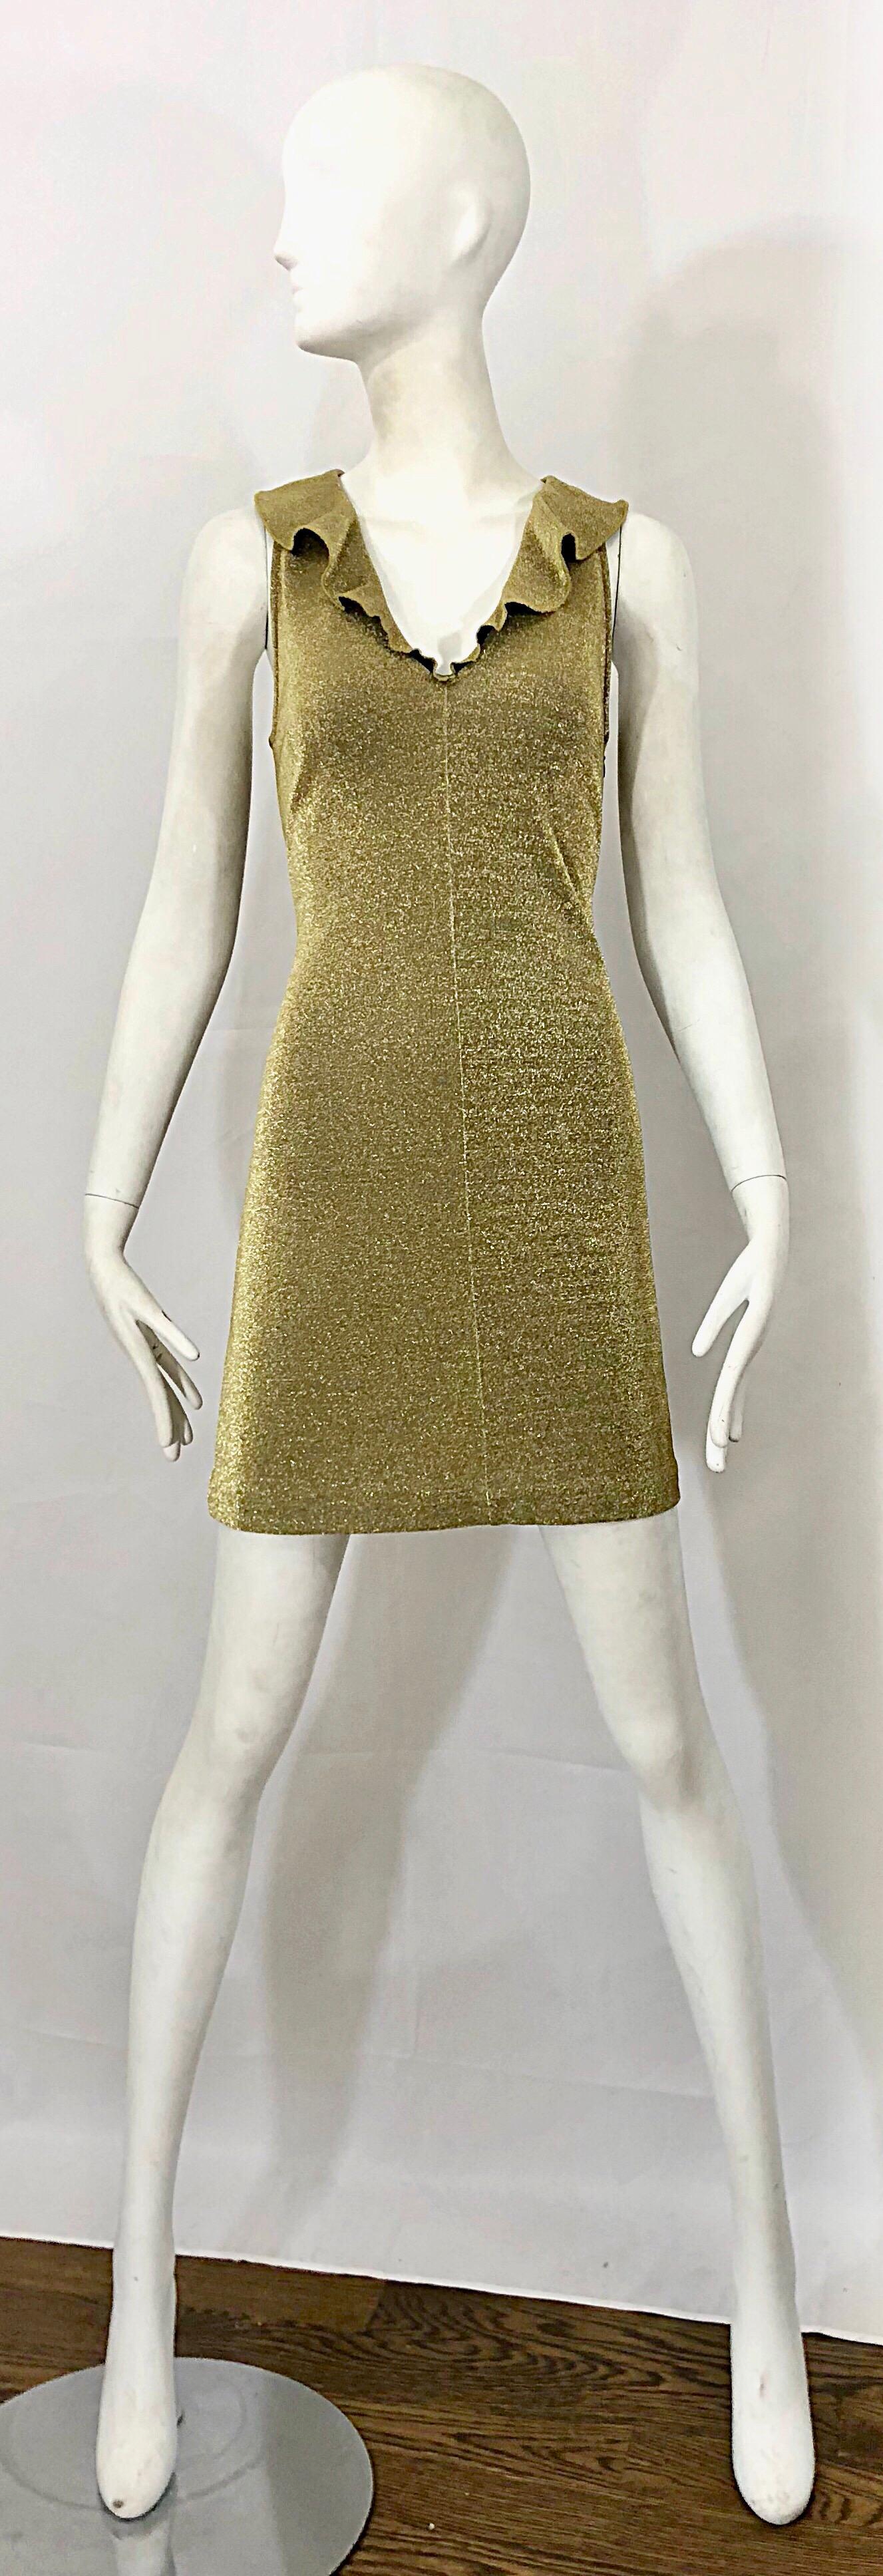 Sexy 1990s MARGANO Italian made gold metallic jersey bodycon dress! Features a luxurious gold jersey that stretches to fit. Flirty ruffle collar. Great alone or belted. The pictured black velvet Yves Saint Laurent YSL is also available in my 1stdibs